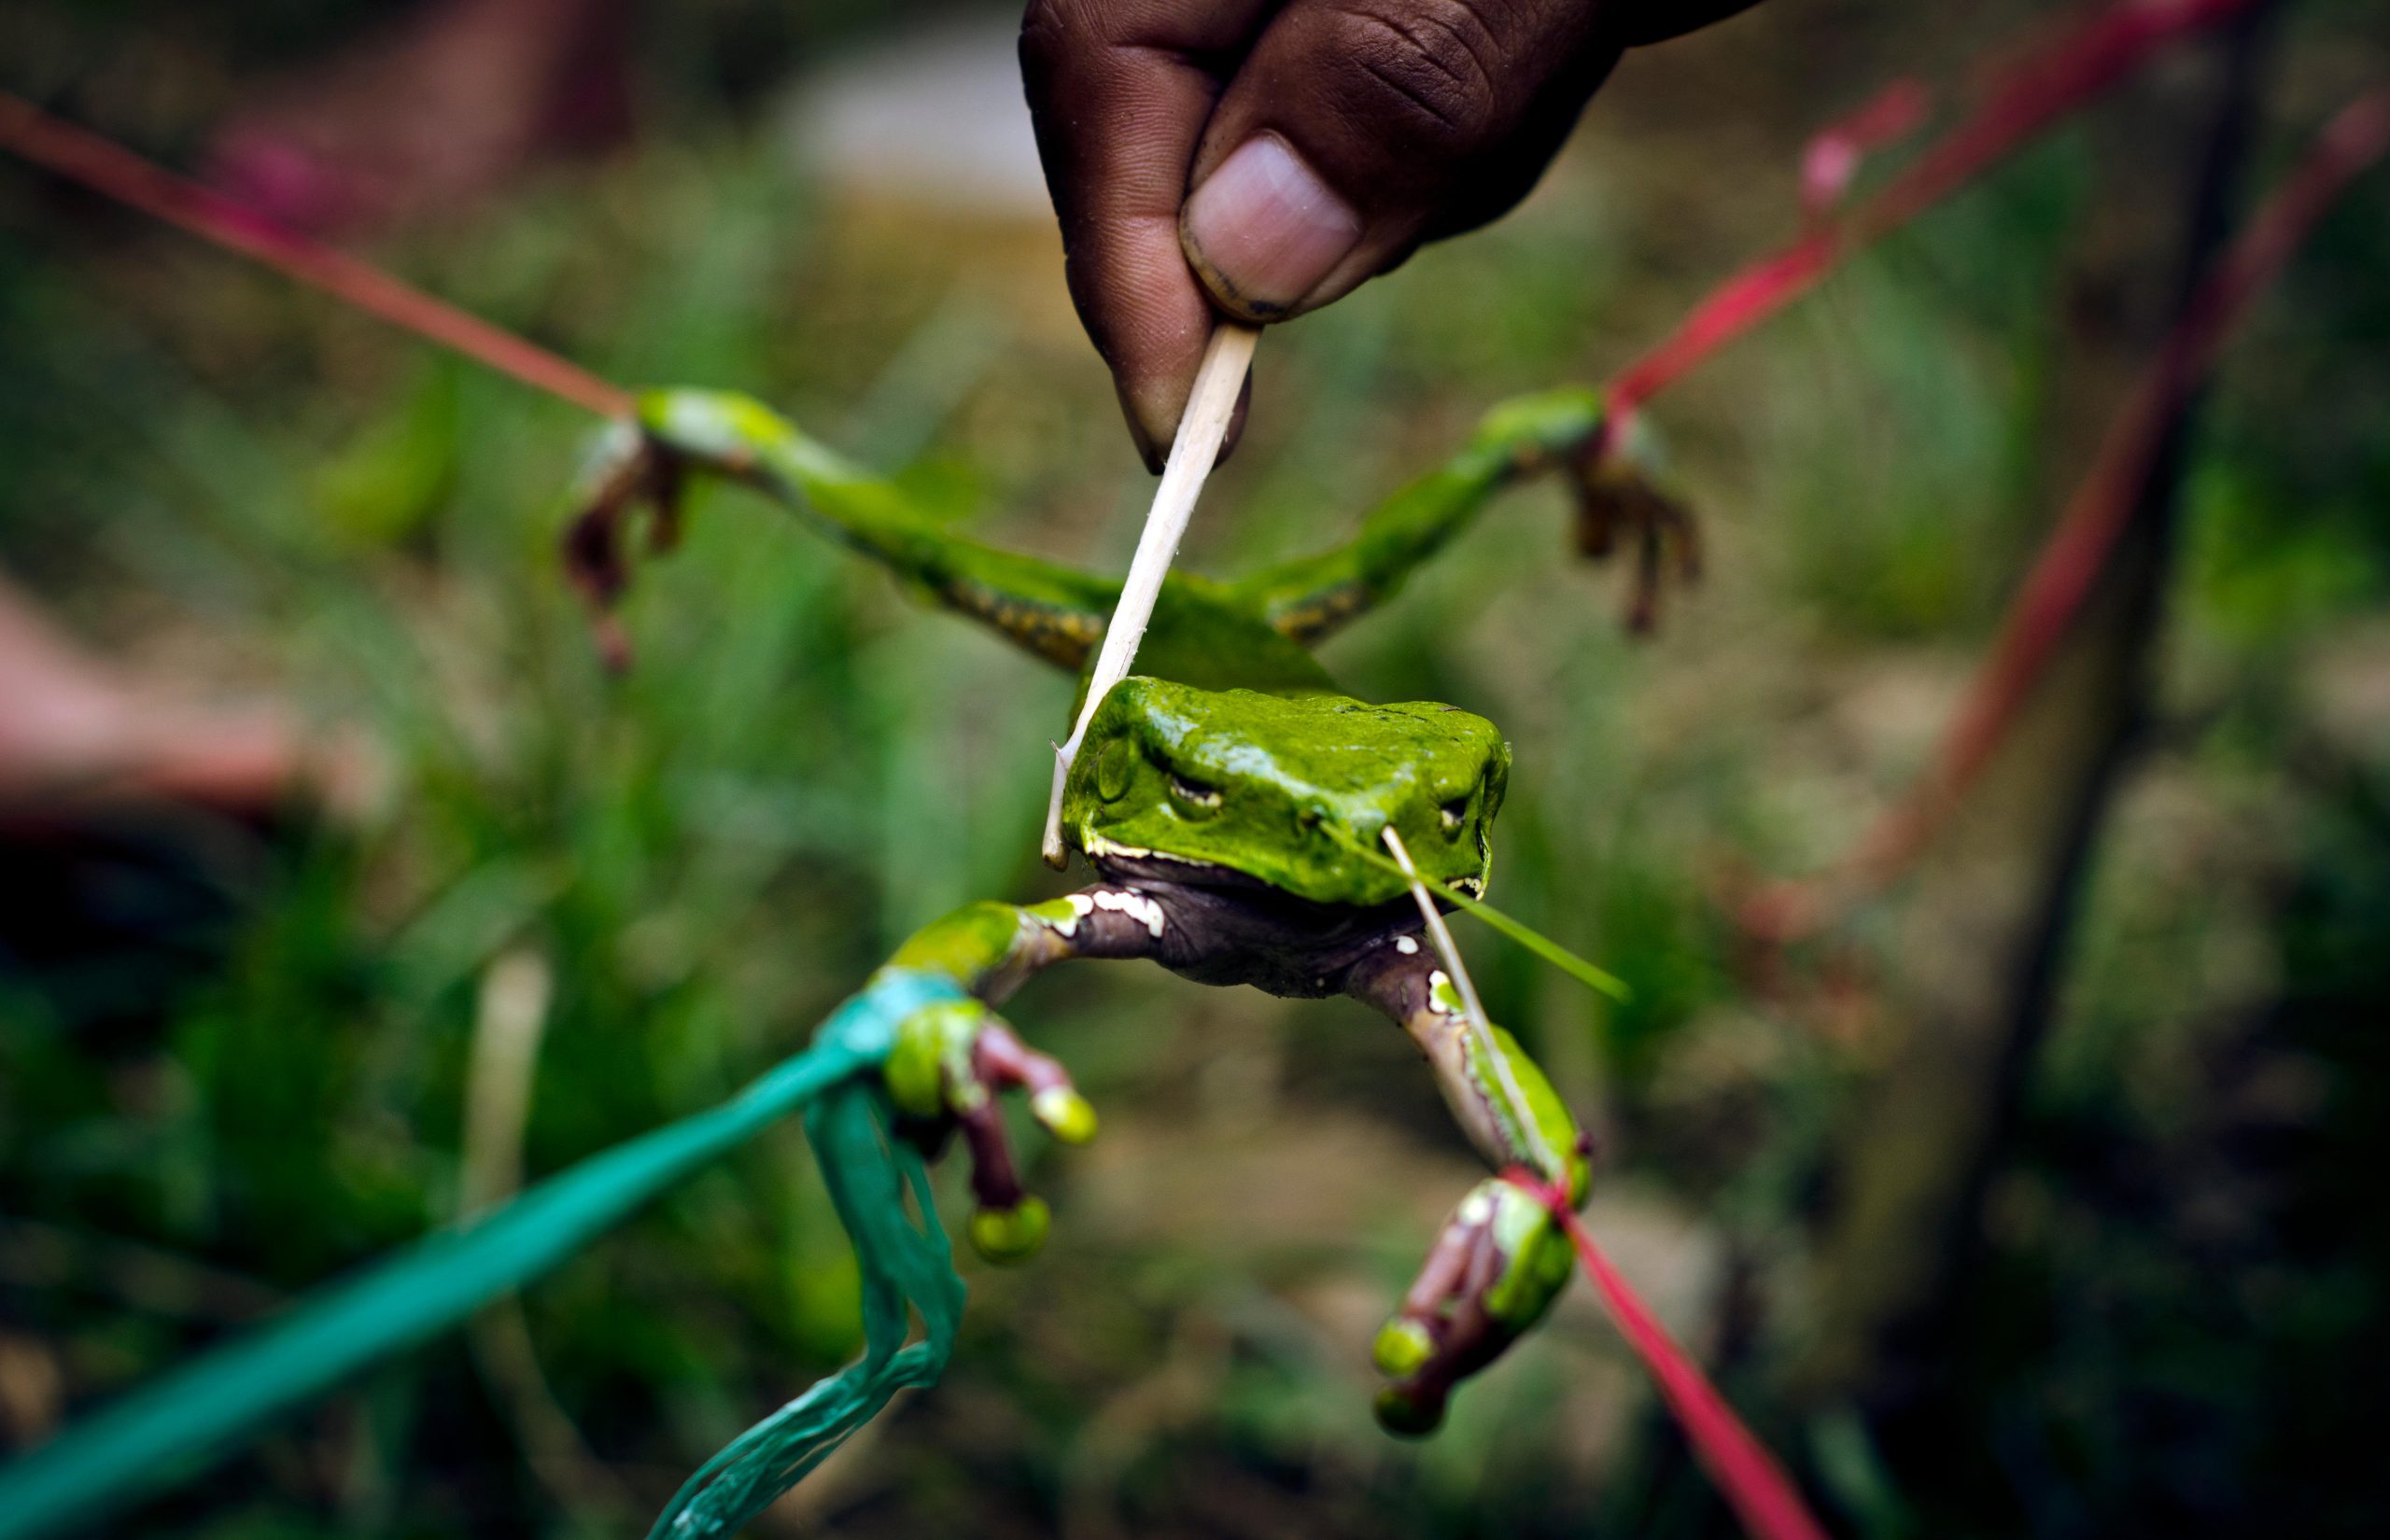 https://149346886.v2.pressablecdn.com/wp-content/uploads/2021/02/Extraction-of-Kambo-frog-poison-near-Iquitos-Peru-scaled.jpg